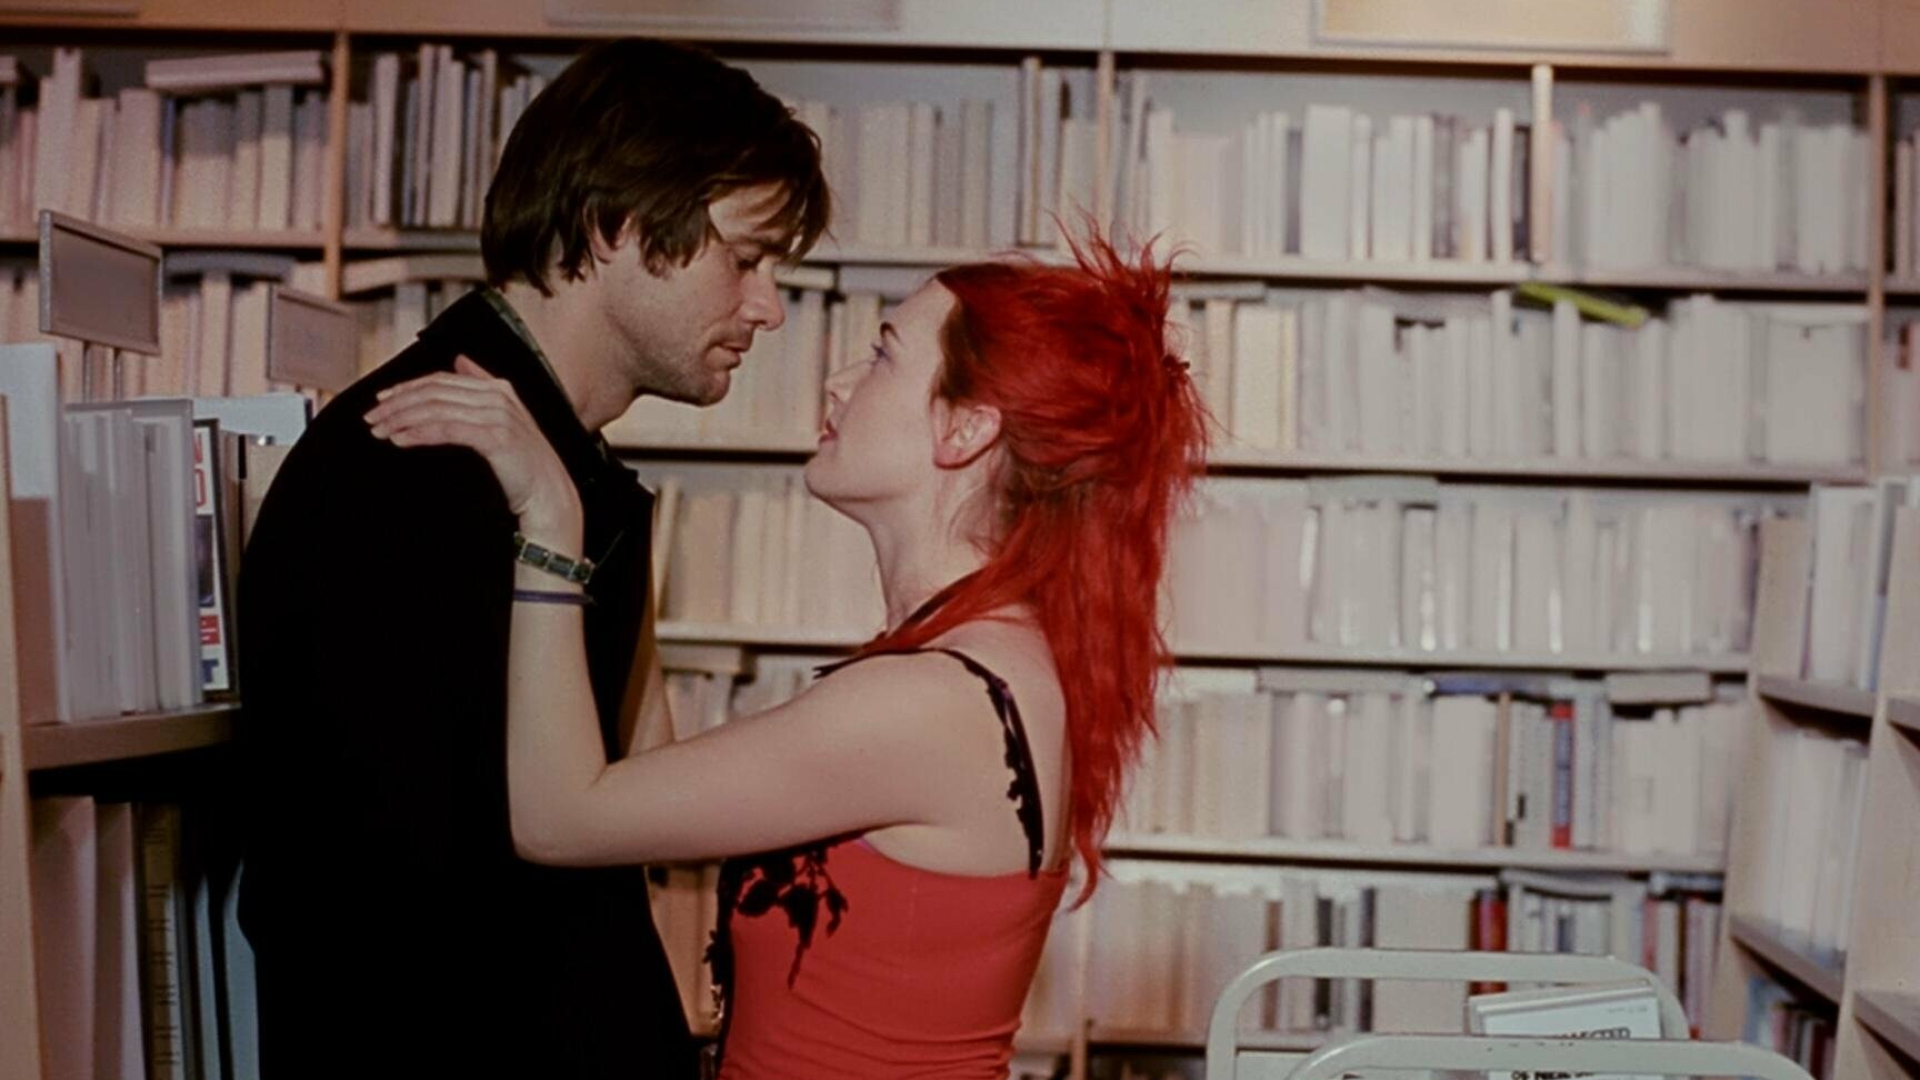 Eternal Sunshine of the Spotless Mind: Kate Winslet as Clementine Kruczynski, who erases Joel Barish from her mind. 1920x1080 Full HD Wallpaper.